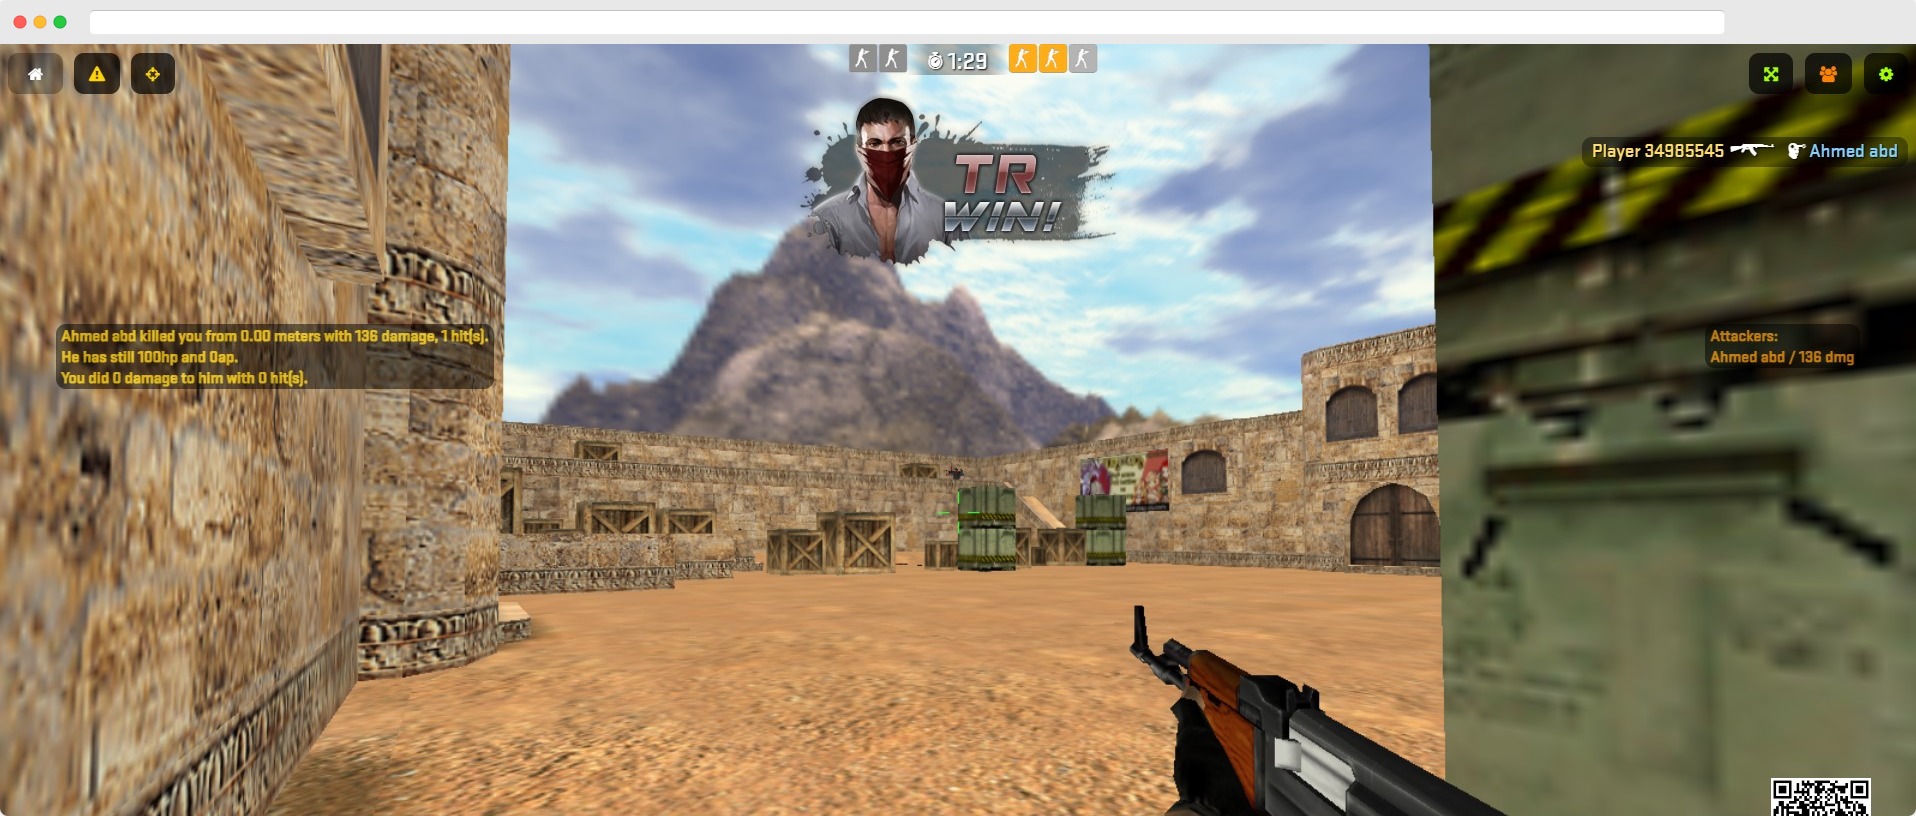 Counter-Strike 1.6 online play